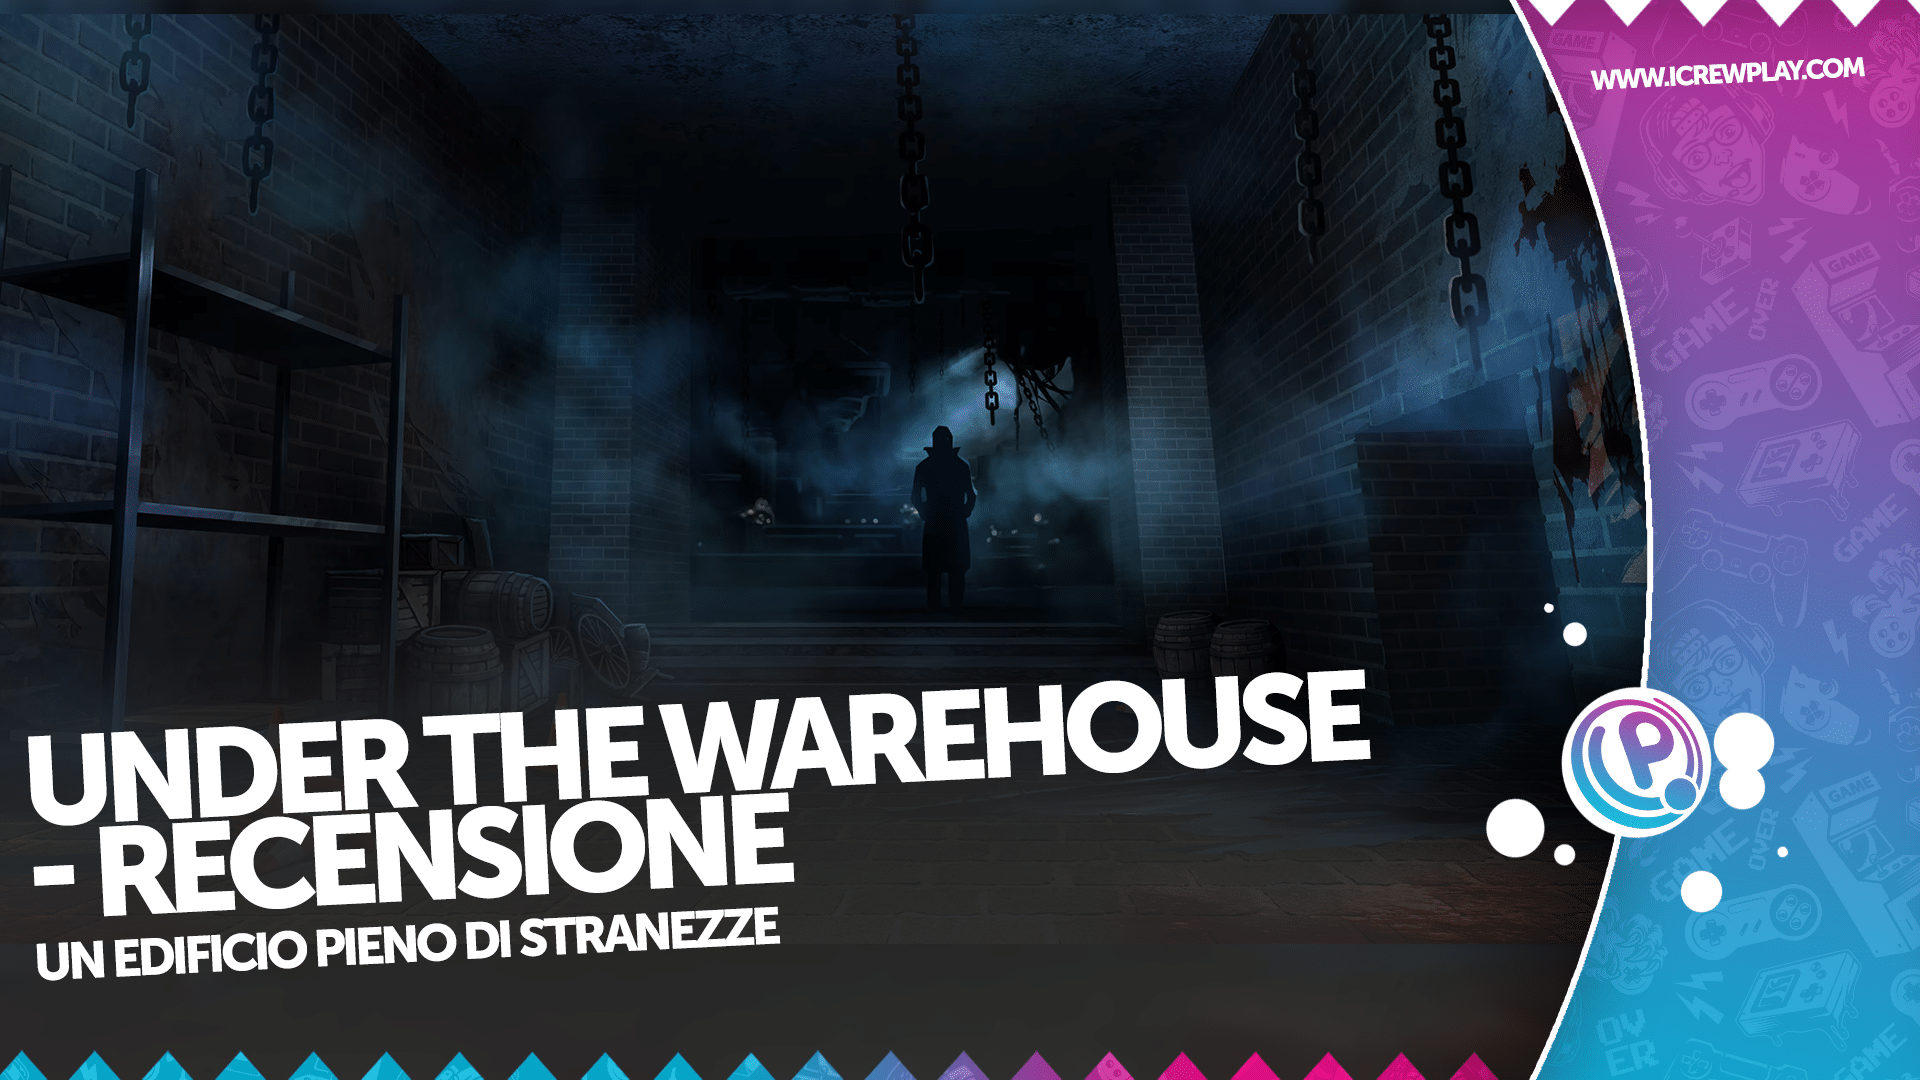 Under The Warehouse recensione 2